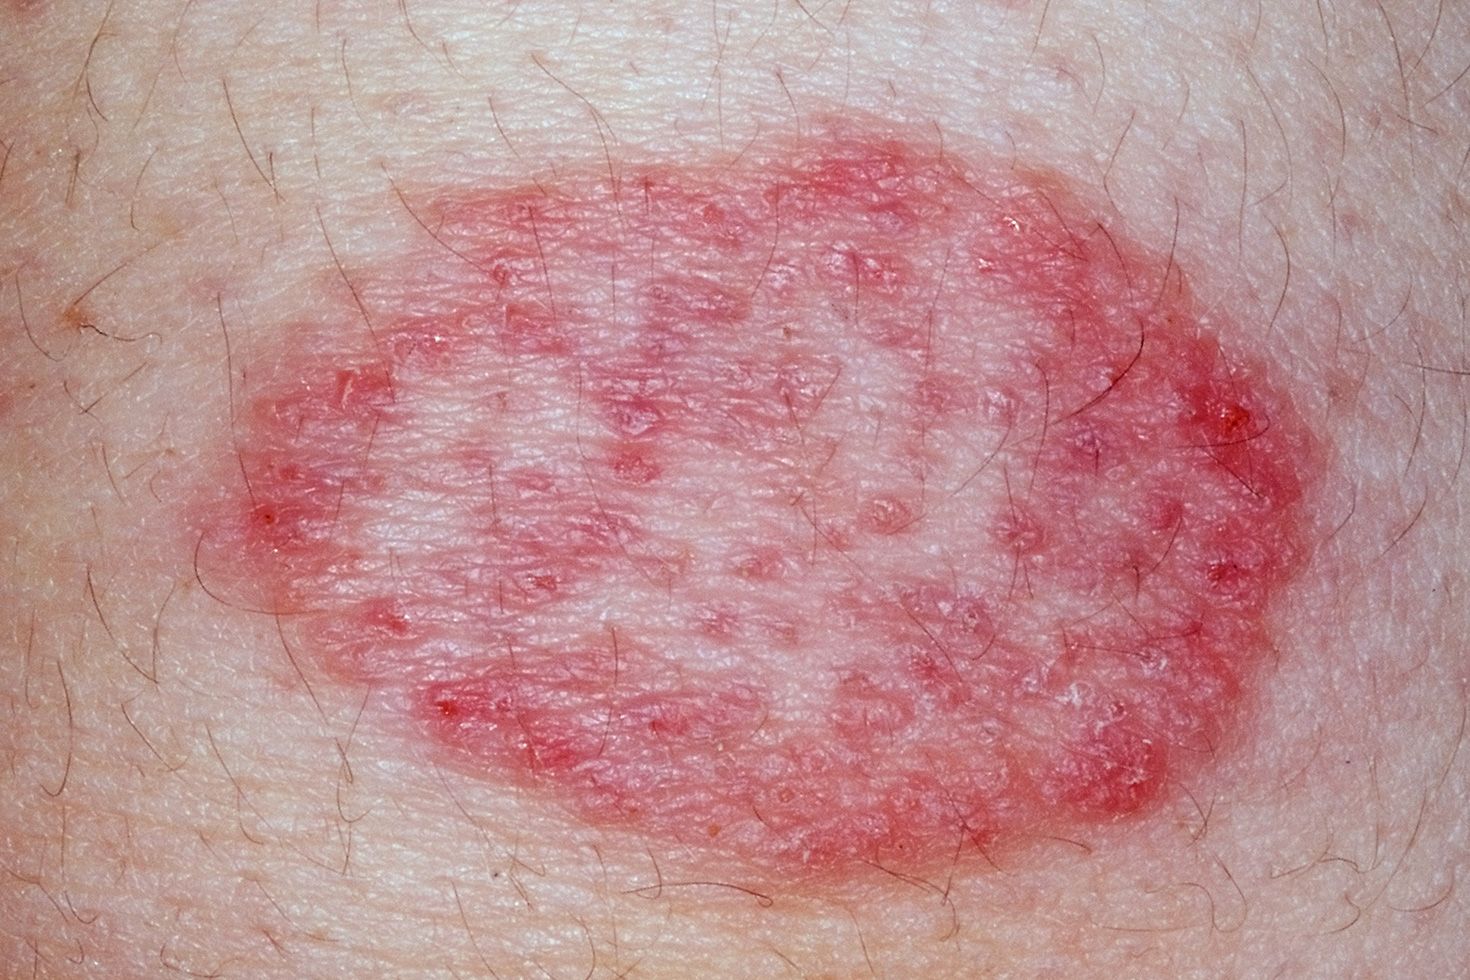 13 Common Causes Of Butt Rashes And Bumps, According To MDs